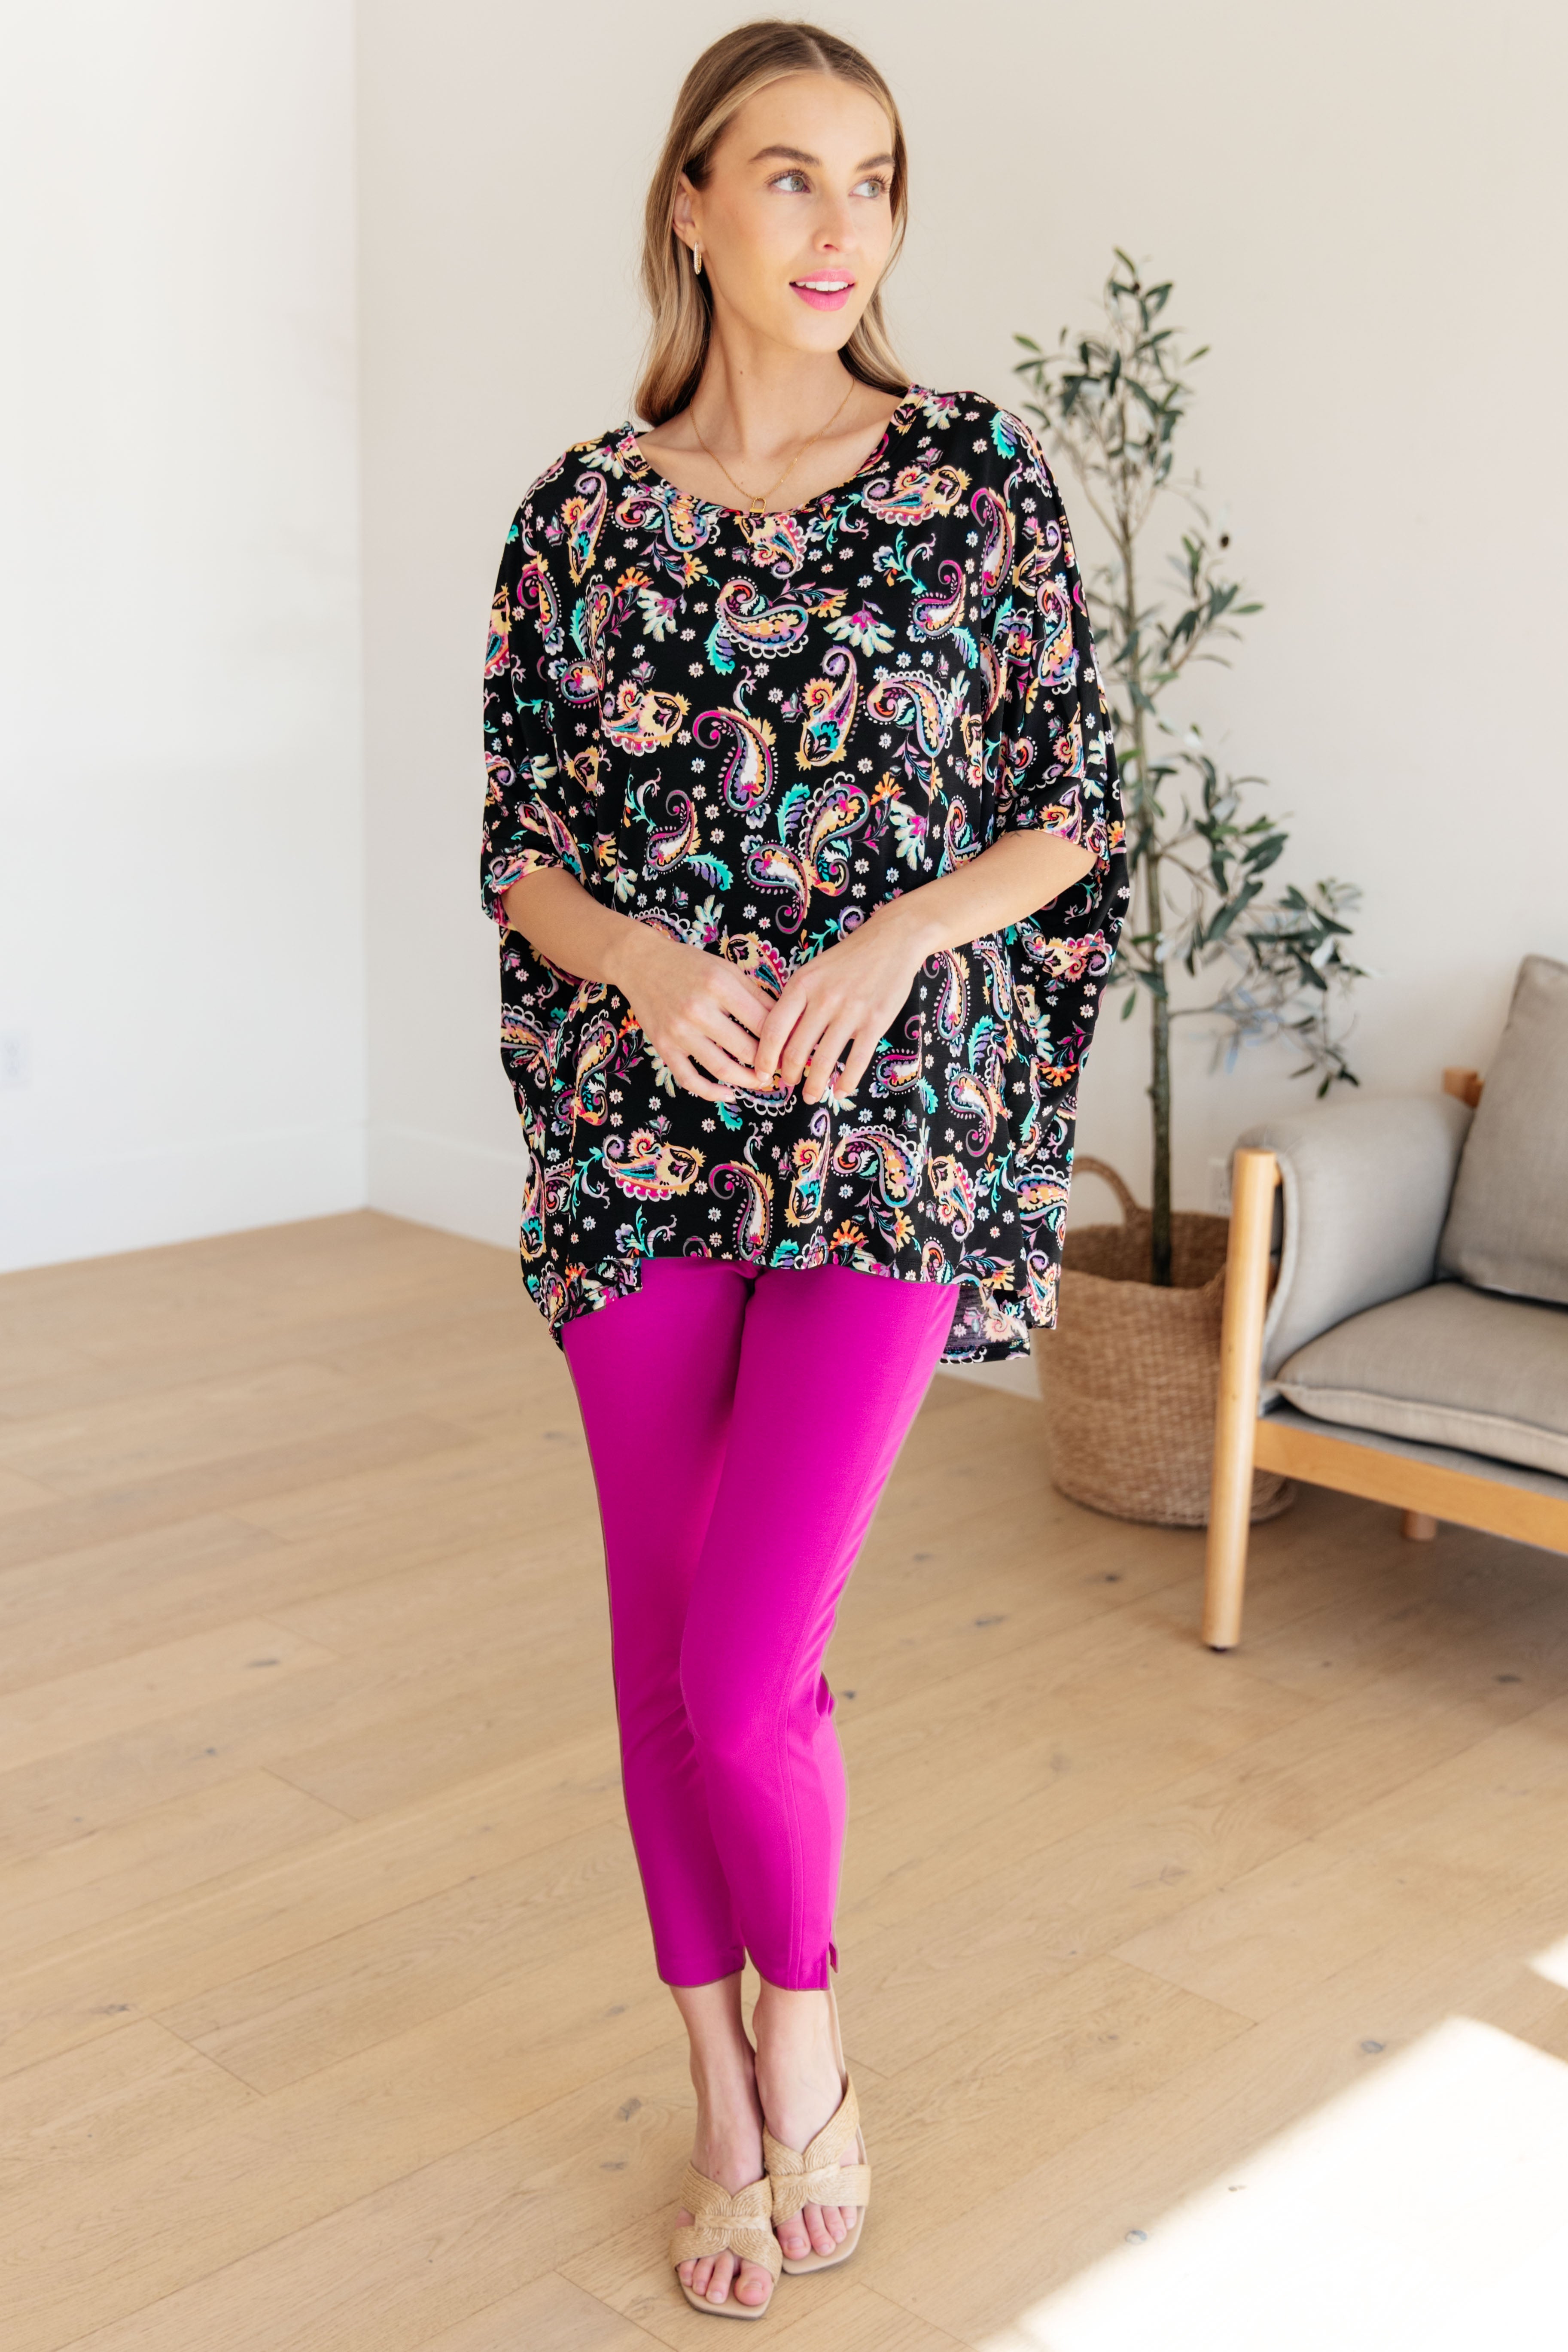 Dear Scarlett Essential Blouse in Black and Pink Paisley Final Sale Monday Markdown 06-10